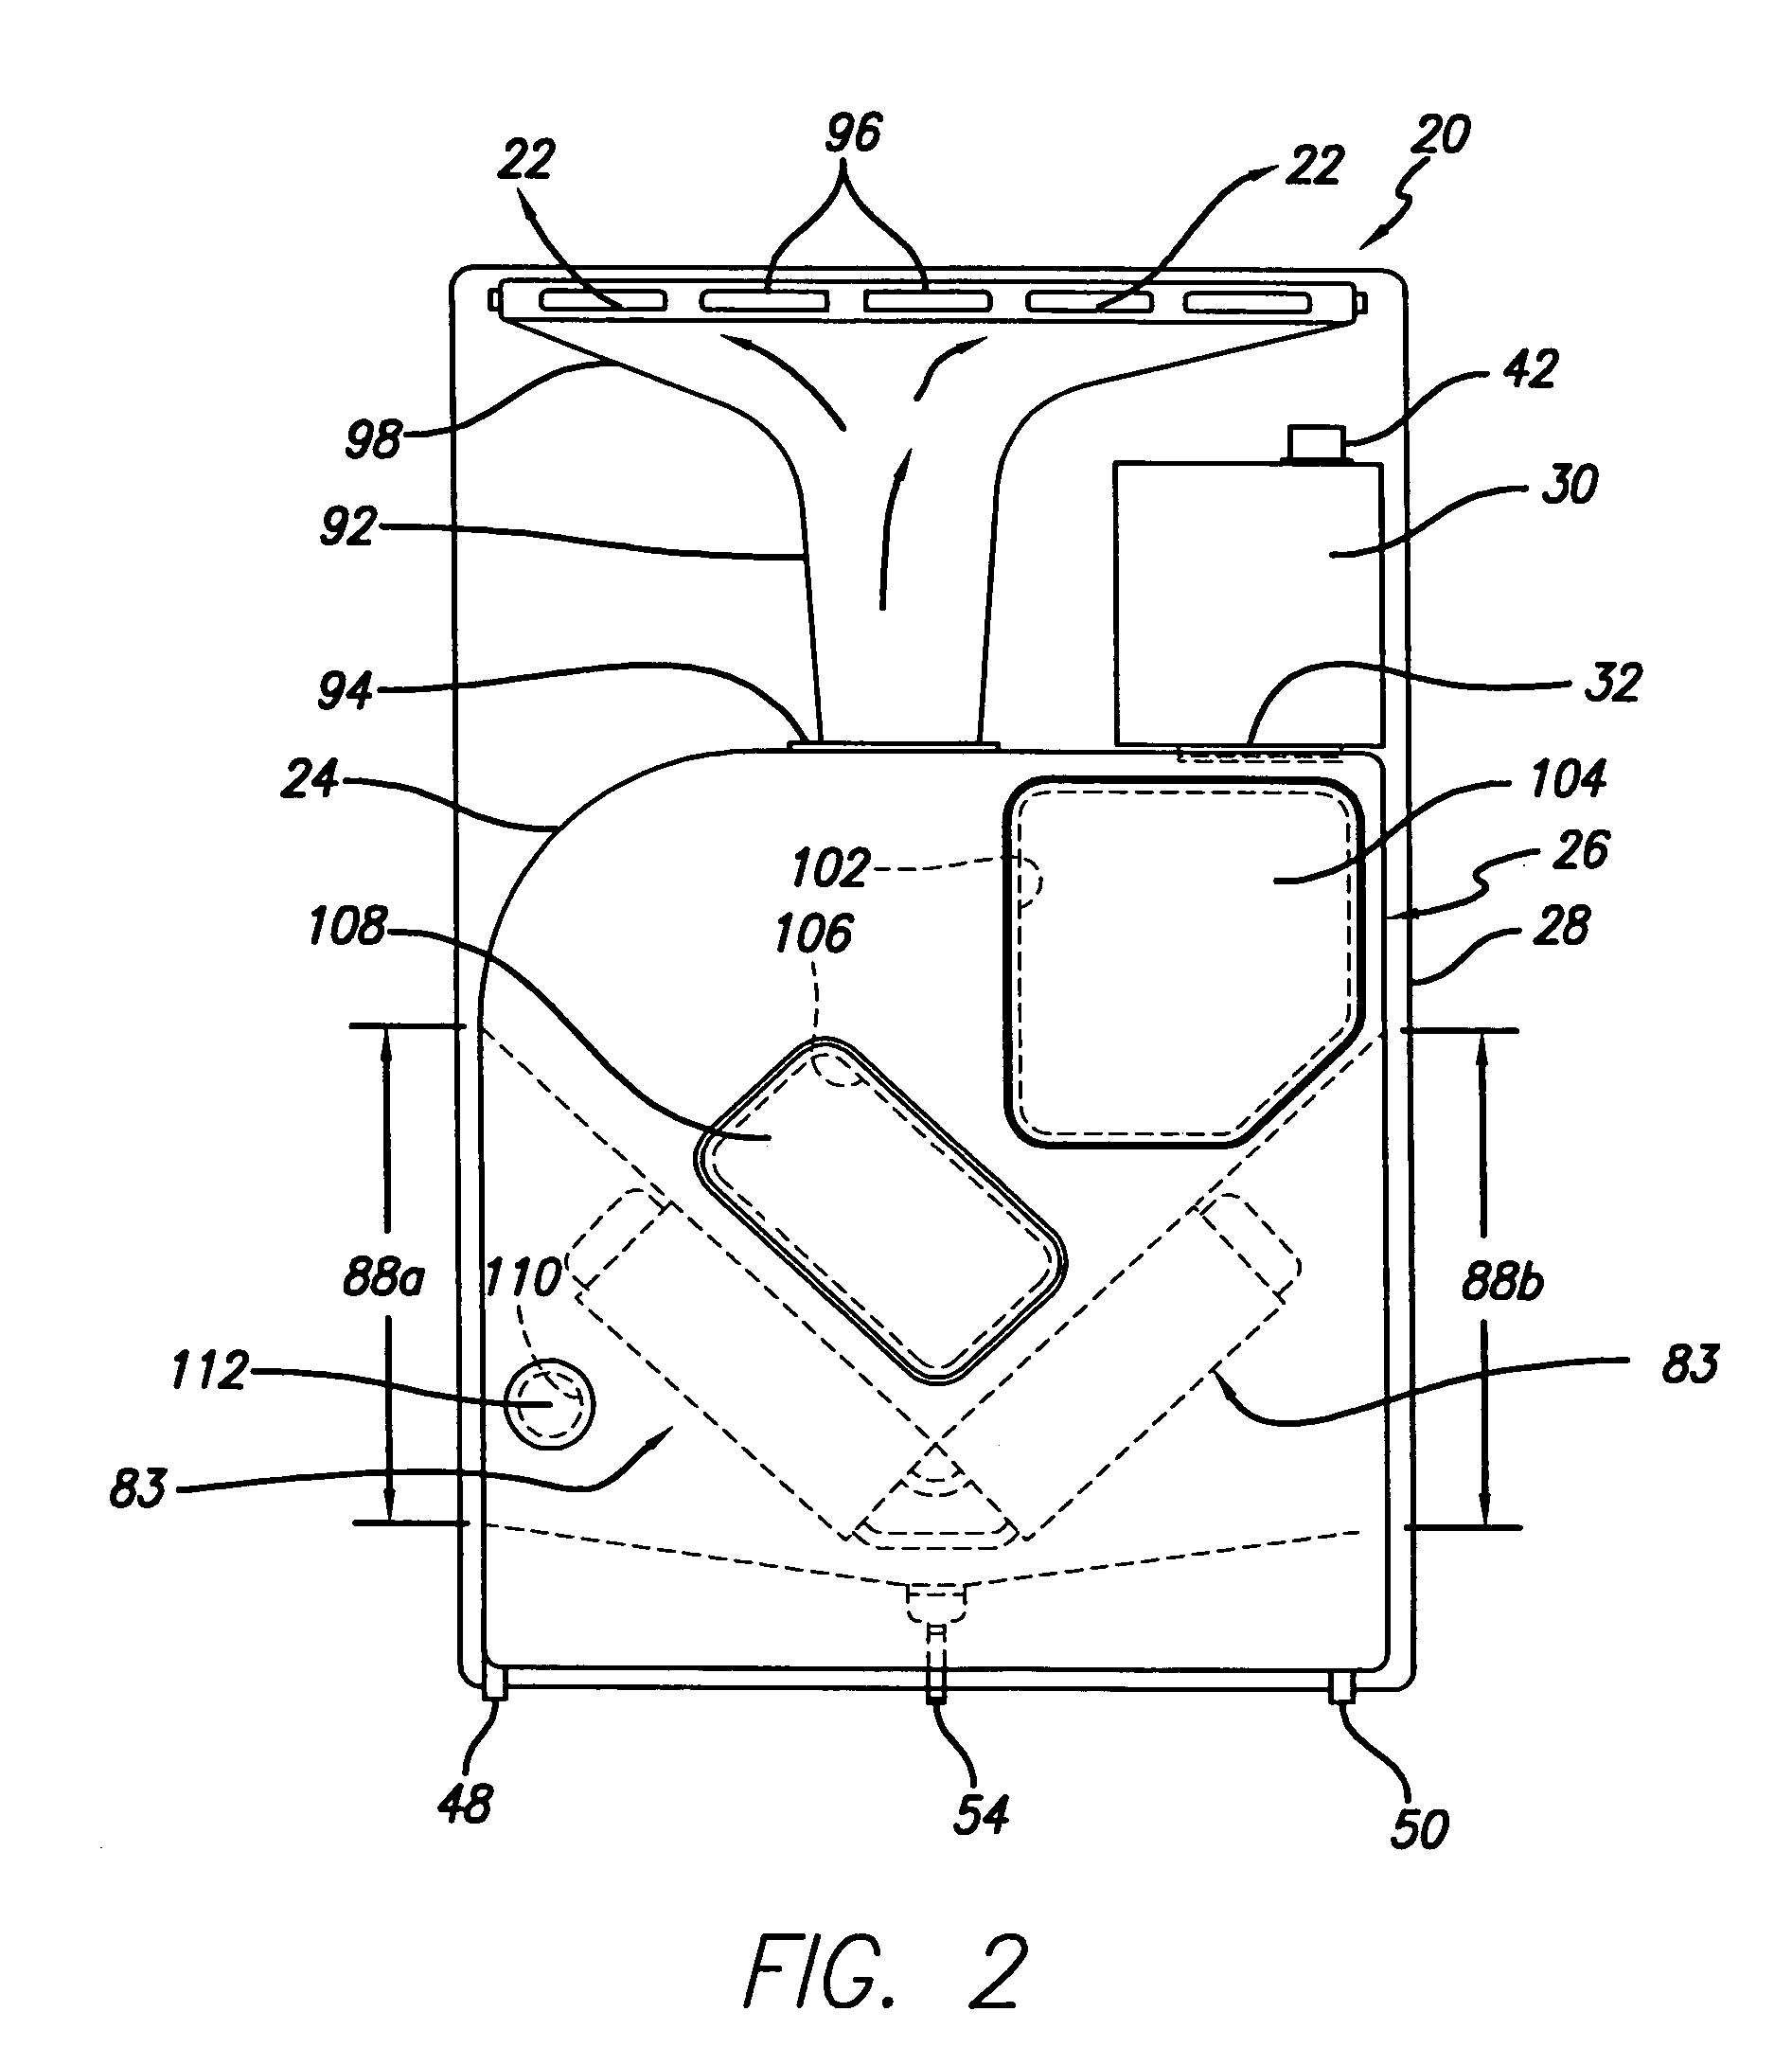 Cooling system for a commercial aircraft galley